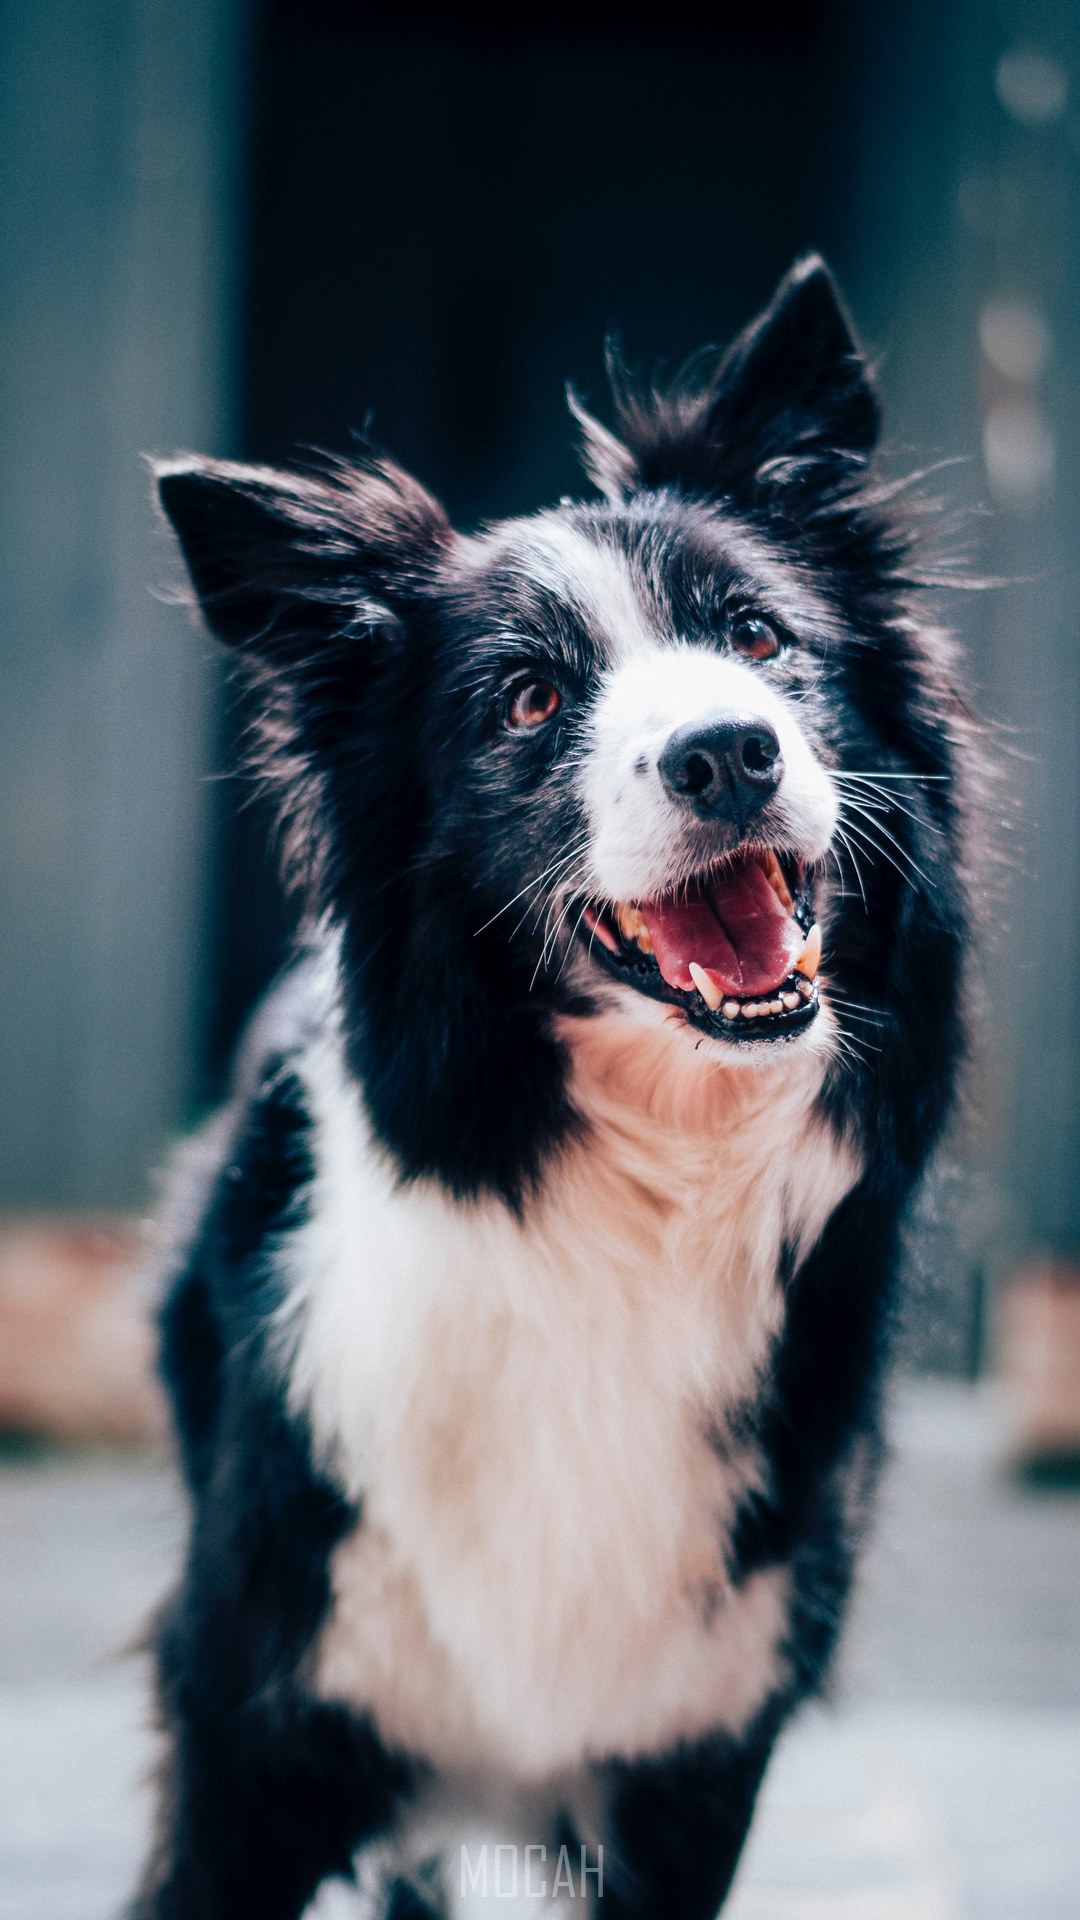 An Alert Black And White Dog Appears To Smile Widely